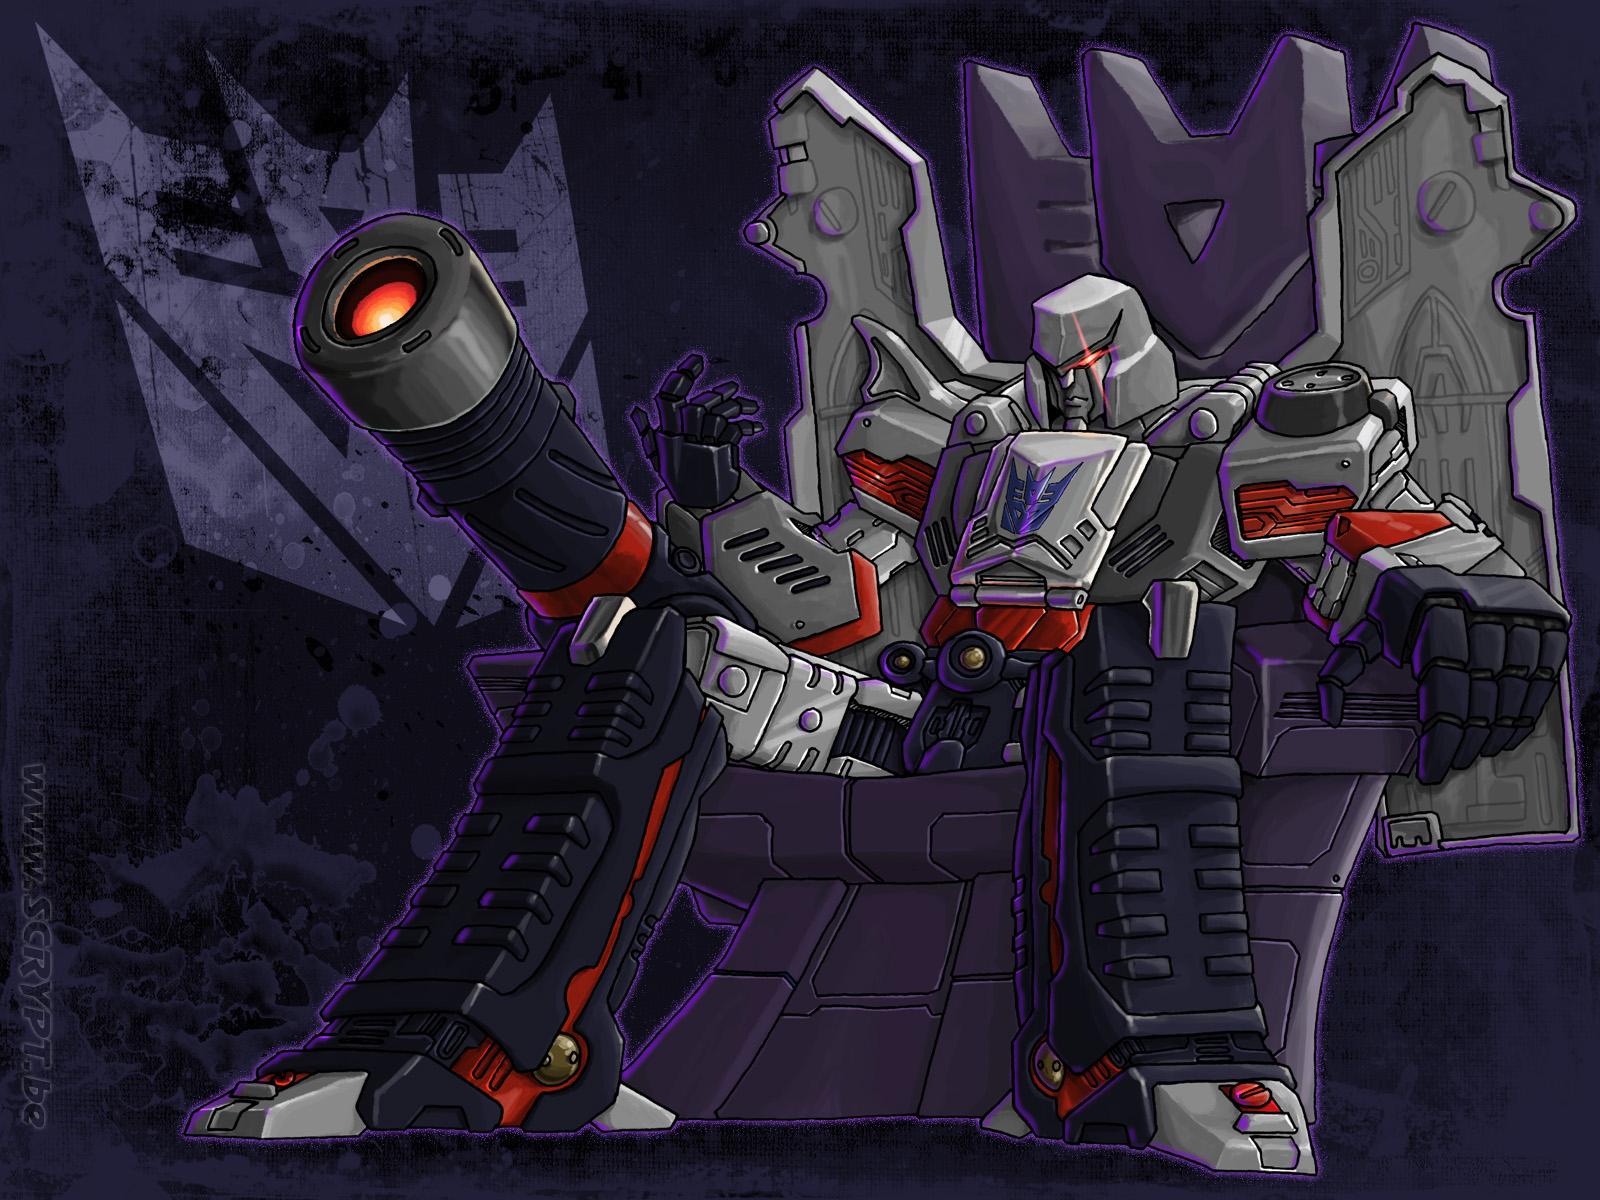 Fanmode For CHUG Megatron? Not A Fan Of His Gun Mode So I Was Wondering If Anyone Figured Out A Tank Ish Looking Fanmode For Him.: Transformers